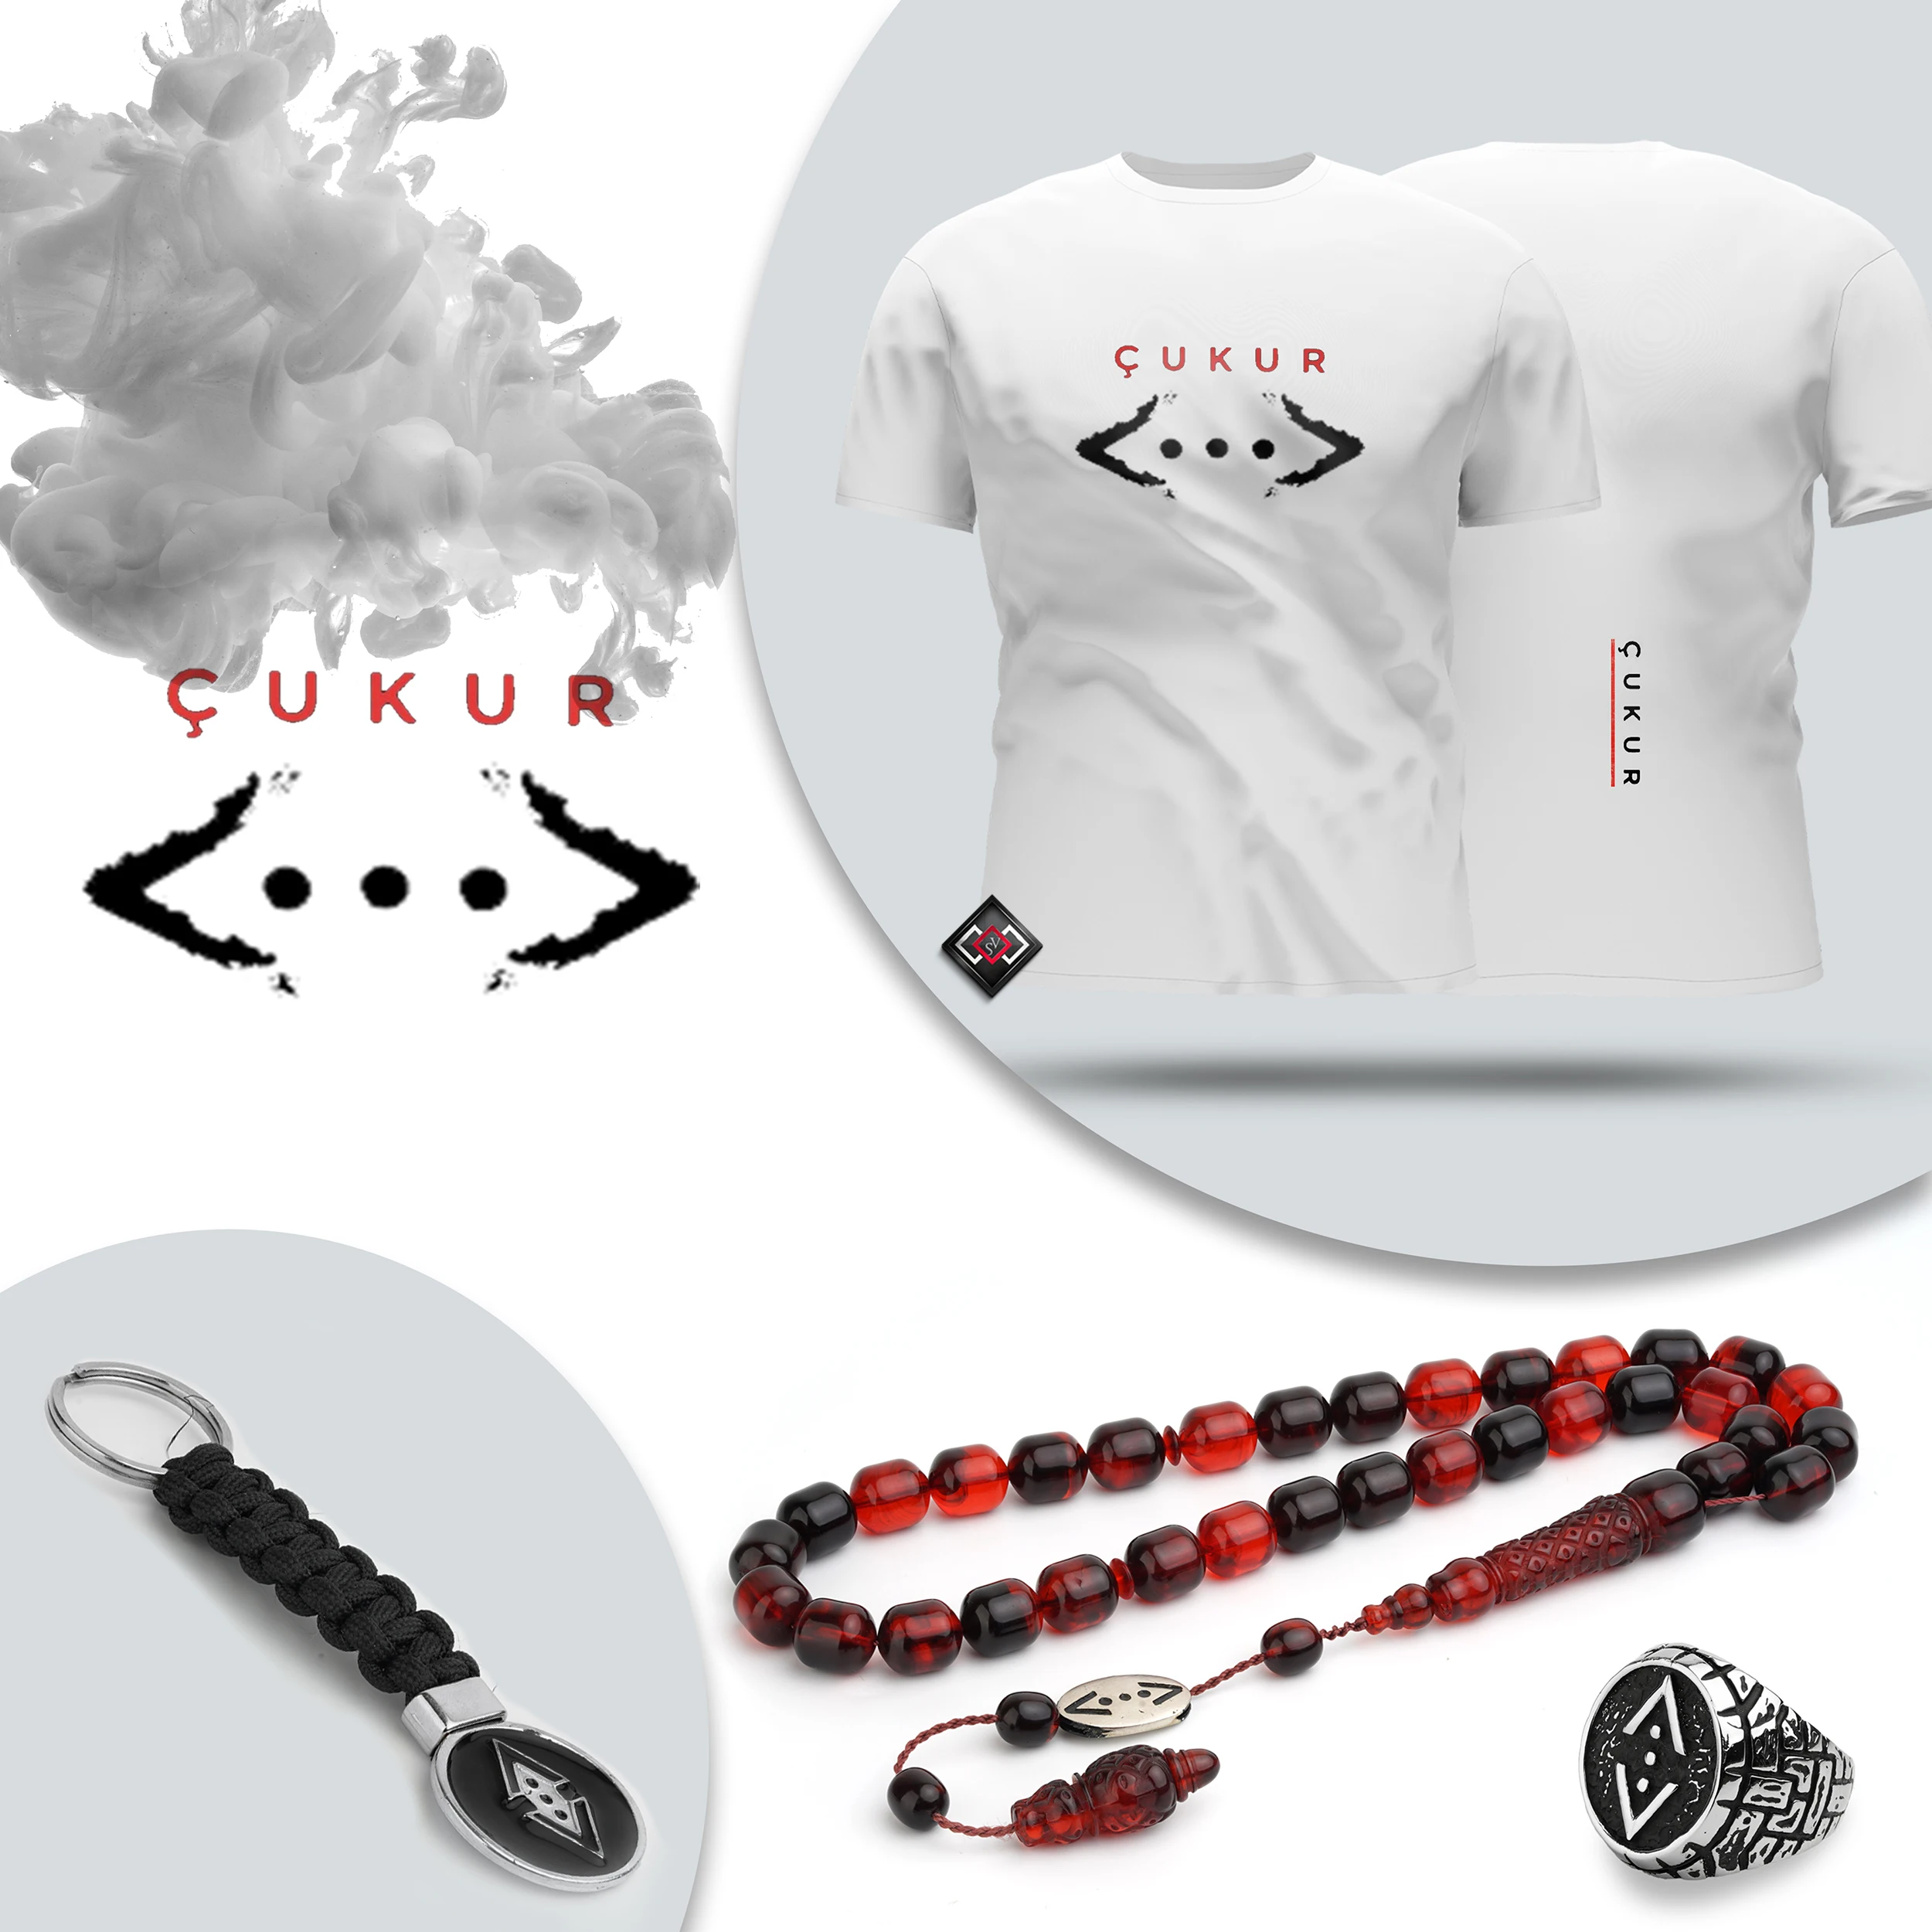 A set of 4 pieces of the çukur logo ( T-shirt , accessory ring , rosary and medal) ....FREE SHIPPING ... Guaranteed high qualit